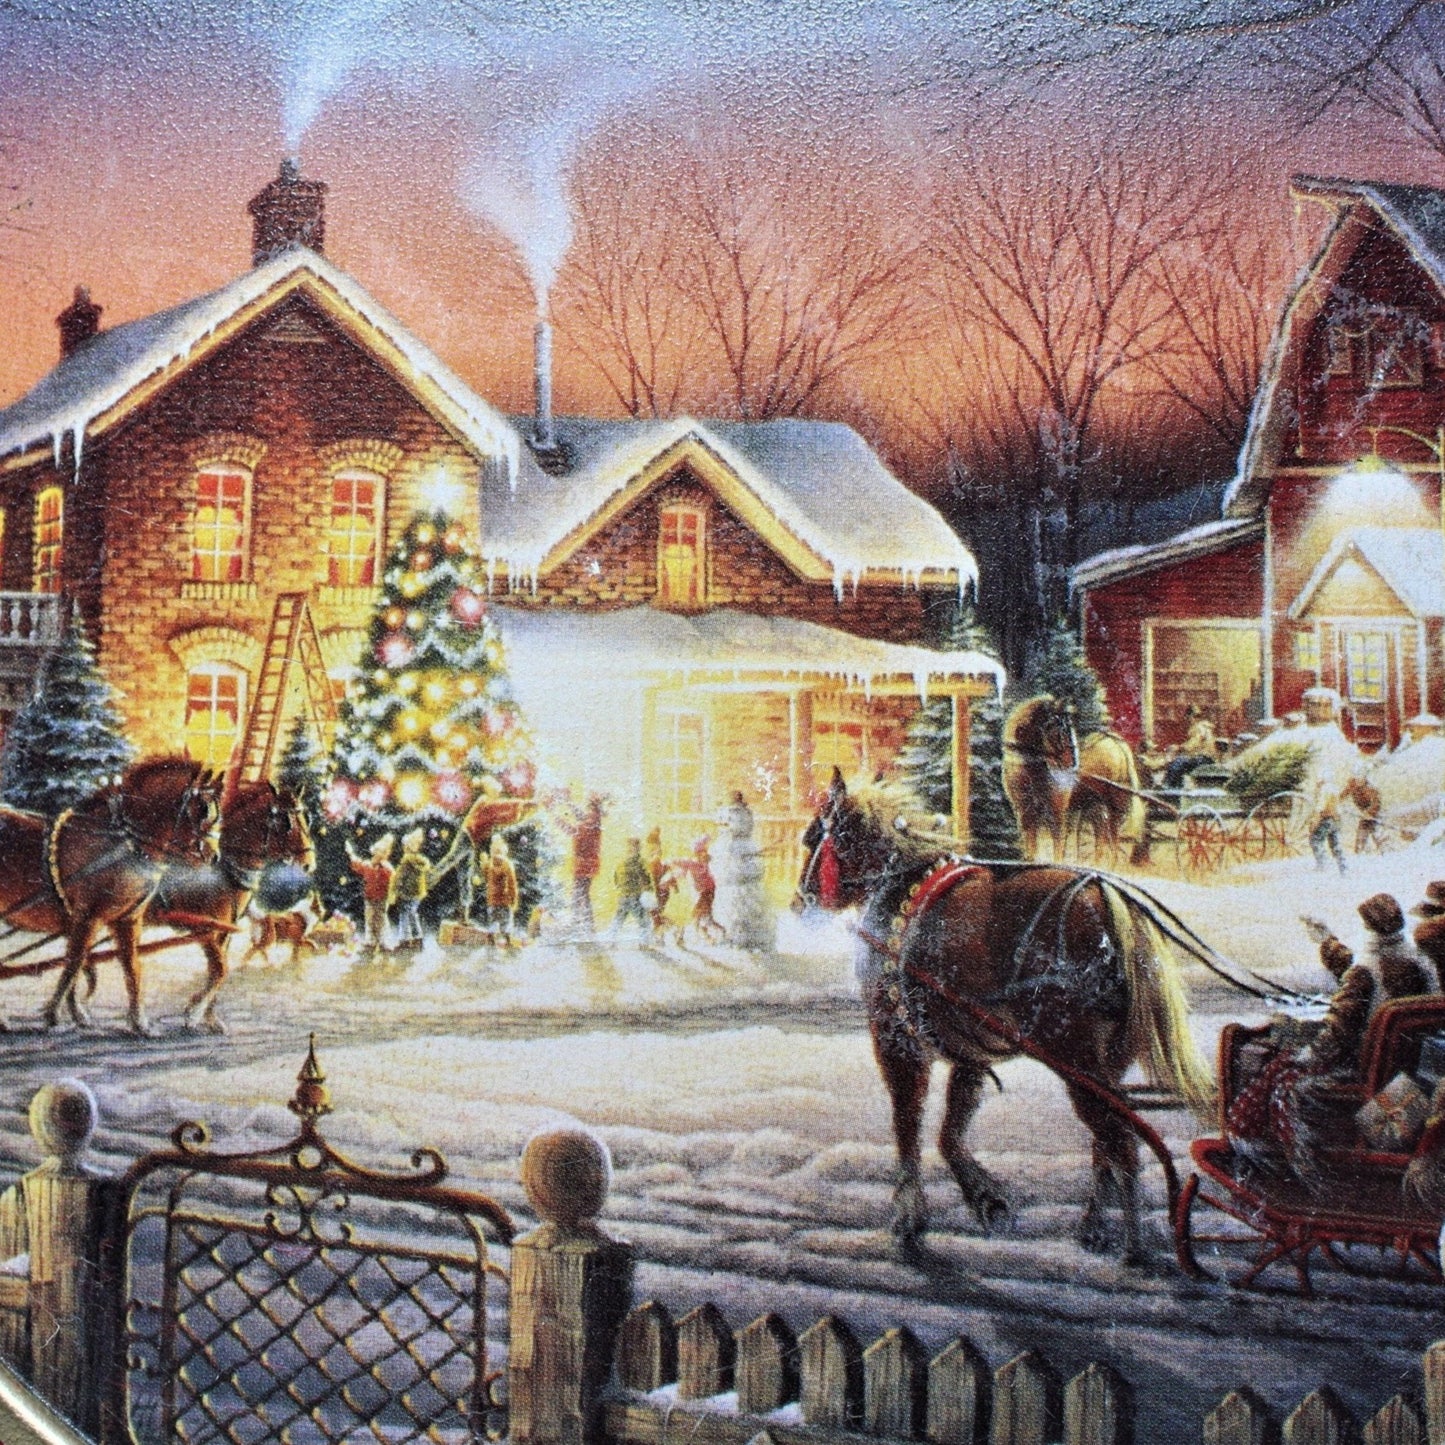 Gift Tin / Cookie Tin, Schwan's, Trimming The Tree, Terry Redlin, 2003